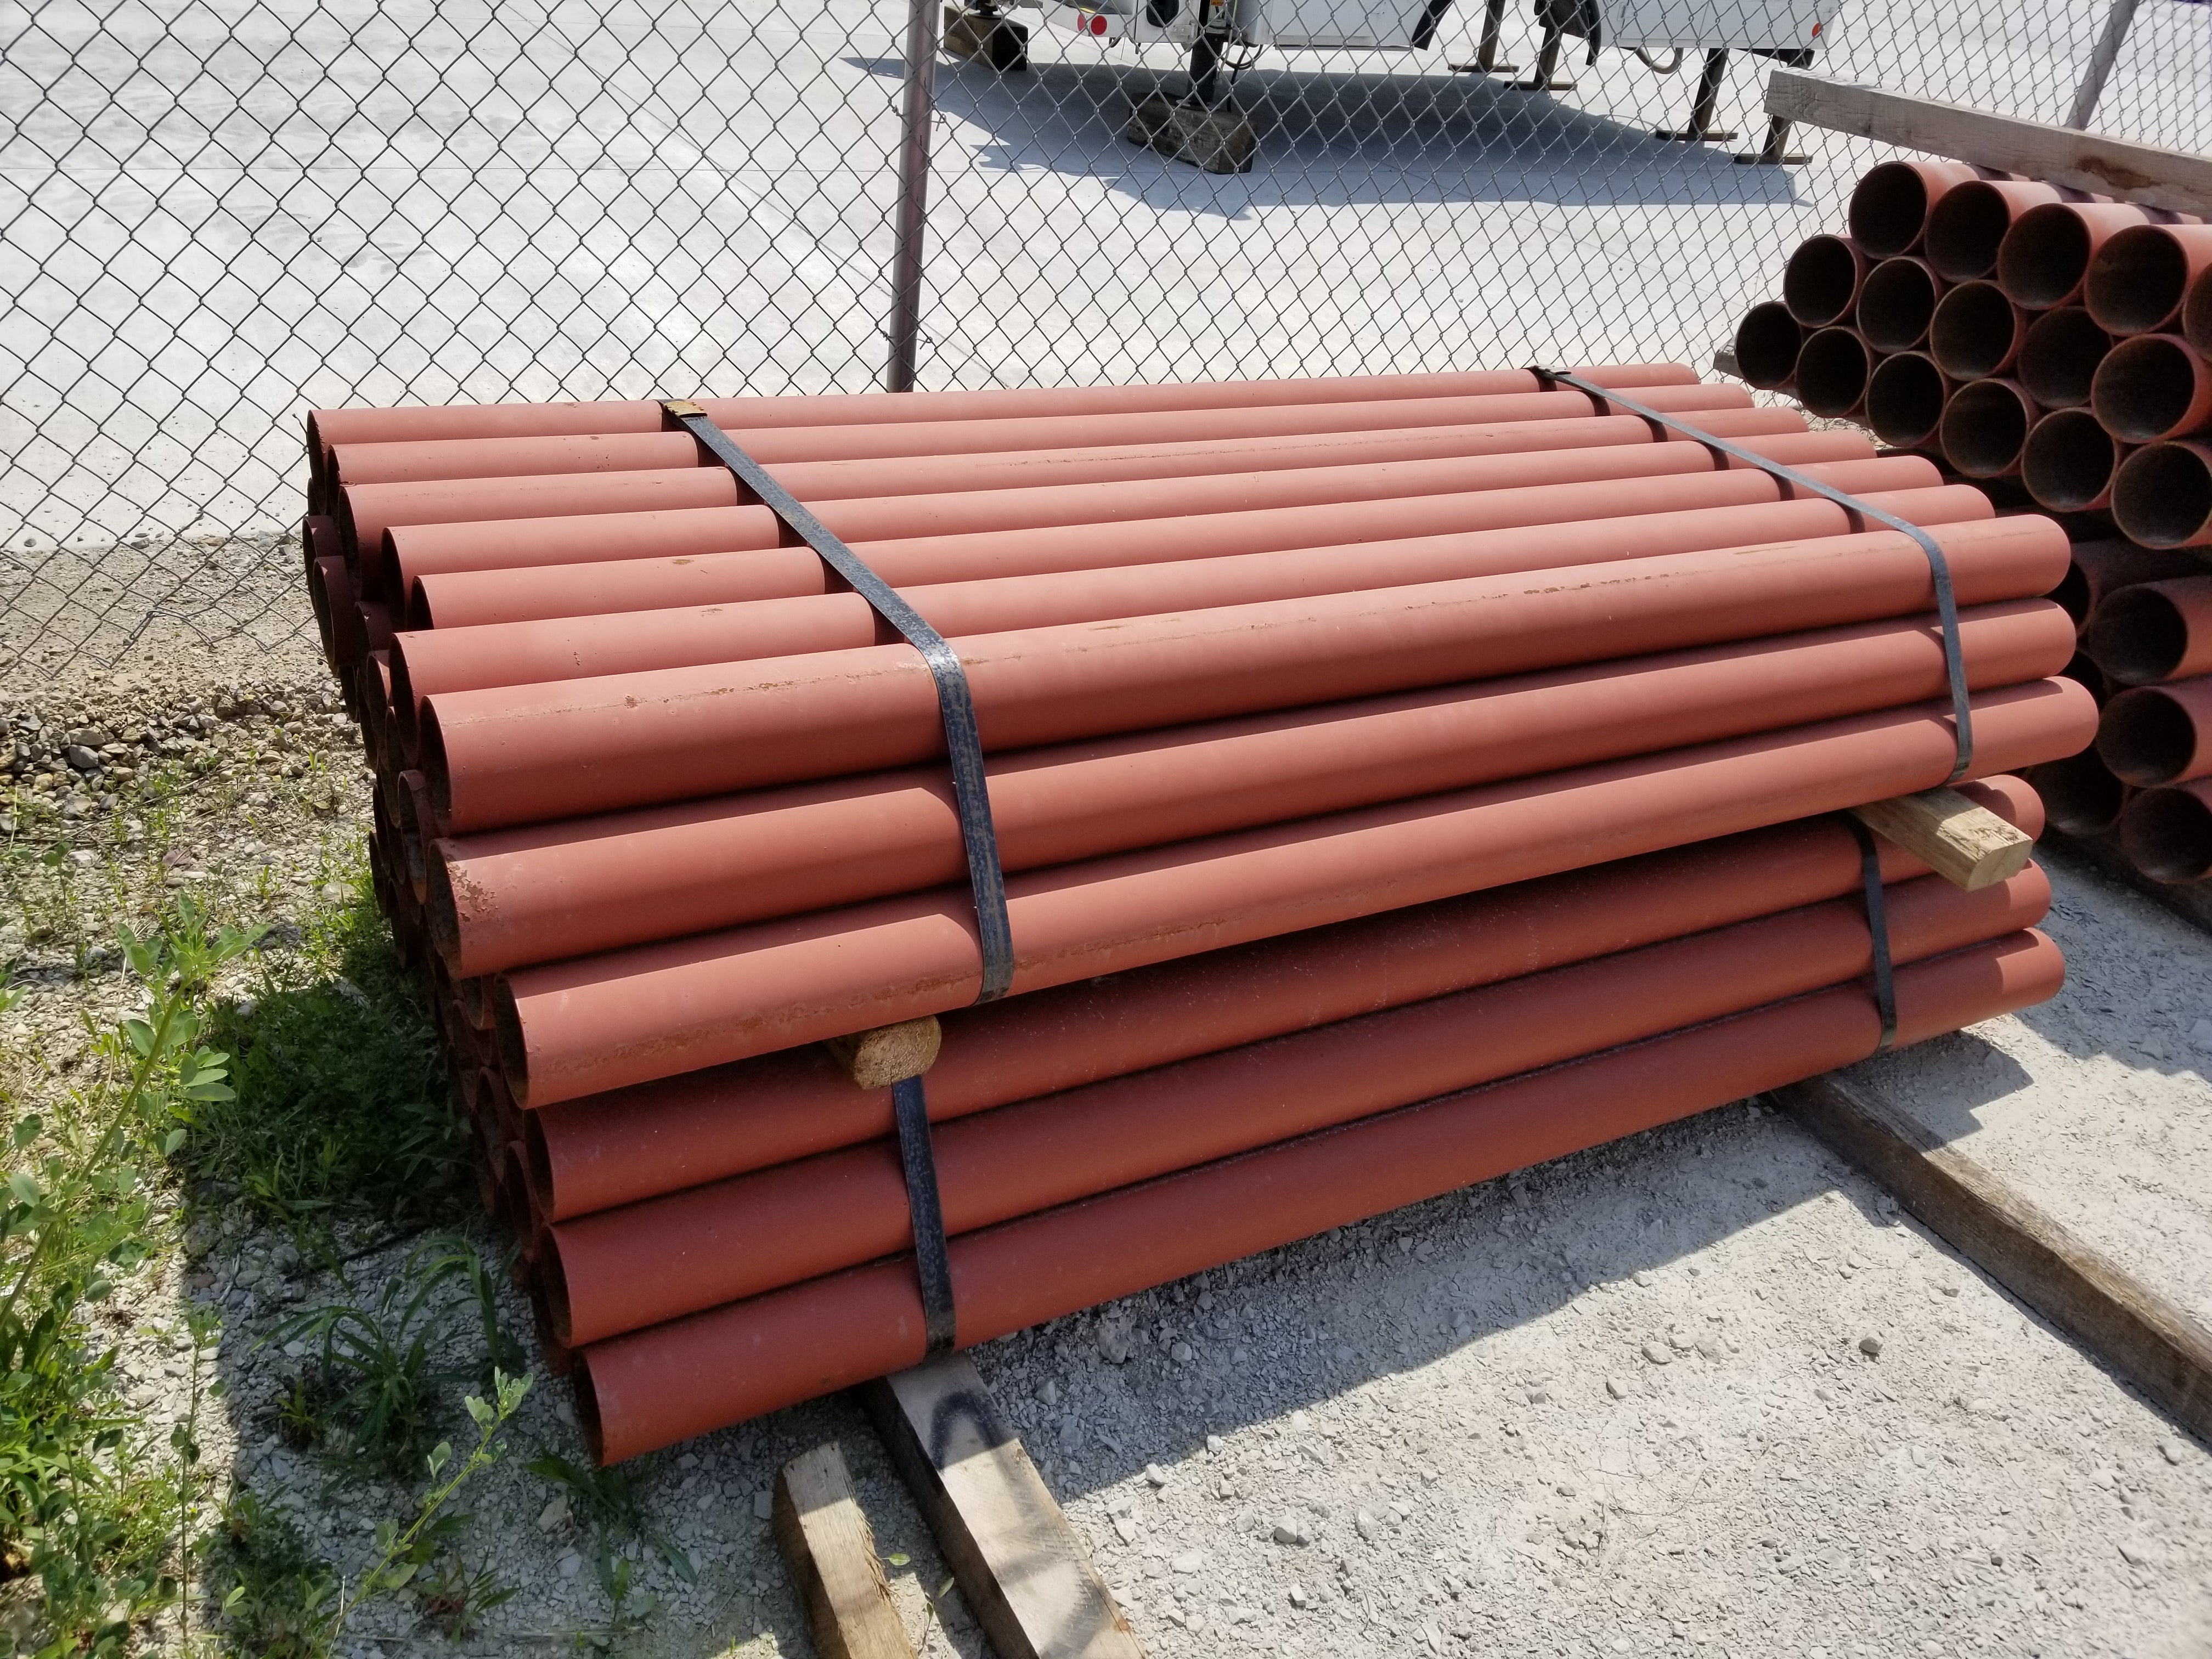 Stainless Steel SCH40 Pipe size 3 x 3.50 x .217 wall